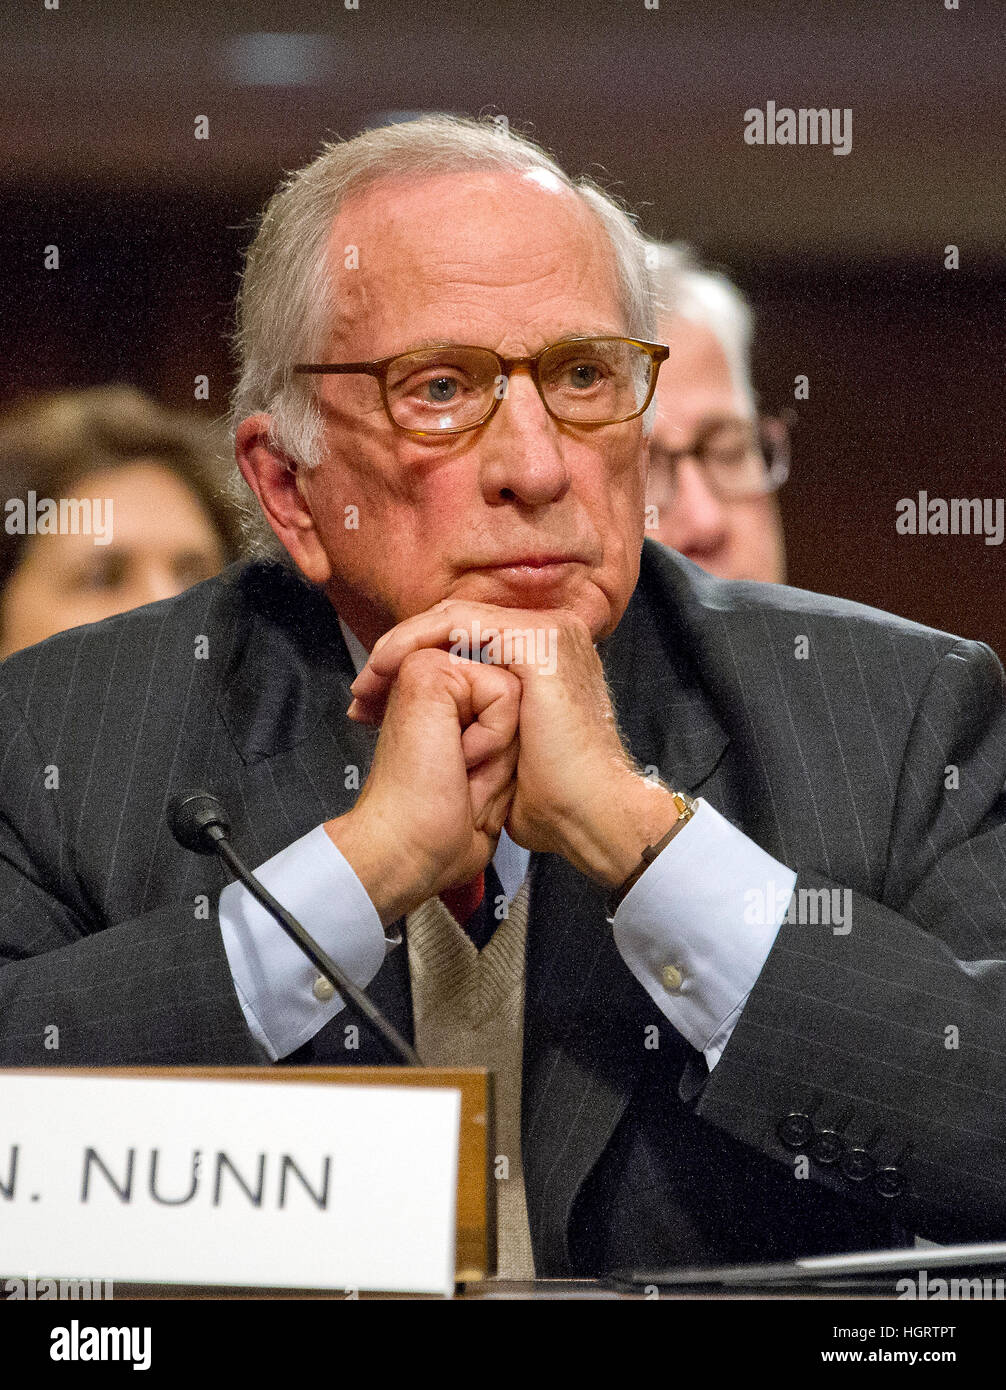 Washington DC, USA. 12th January 2017. Former United States Senator Sam Nunn (Democrat of Georgia) appears before the United States Senate Committee on Armed Services as it holds a confirmation hearing on the nomination of US Marine Corps General James N. Mattis (retired) to be Secretary of Defense on Capitol Hill in Washington, DC on Thursday, January 12, 2017. Nunn introduced and endorsed Mattis for the post. Credit: MediaPunch Inc/Alamy Live News Stock Photo